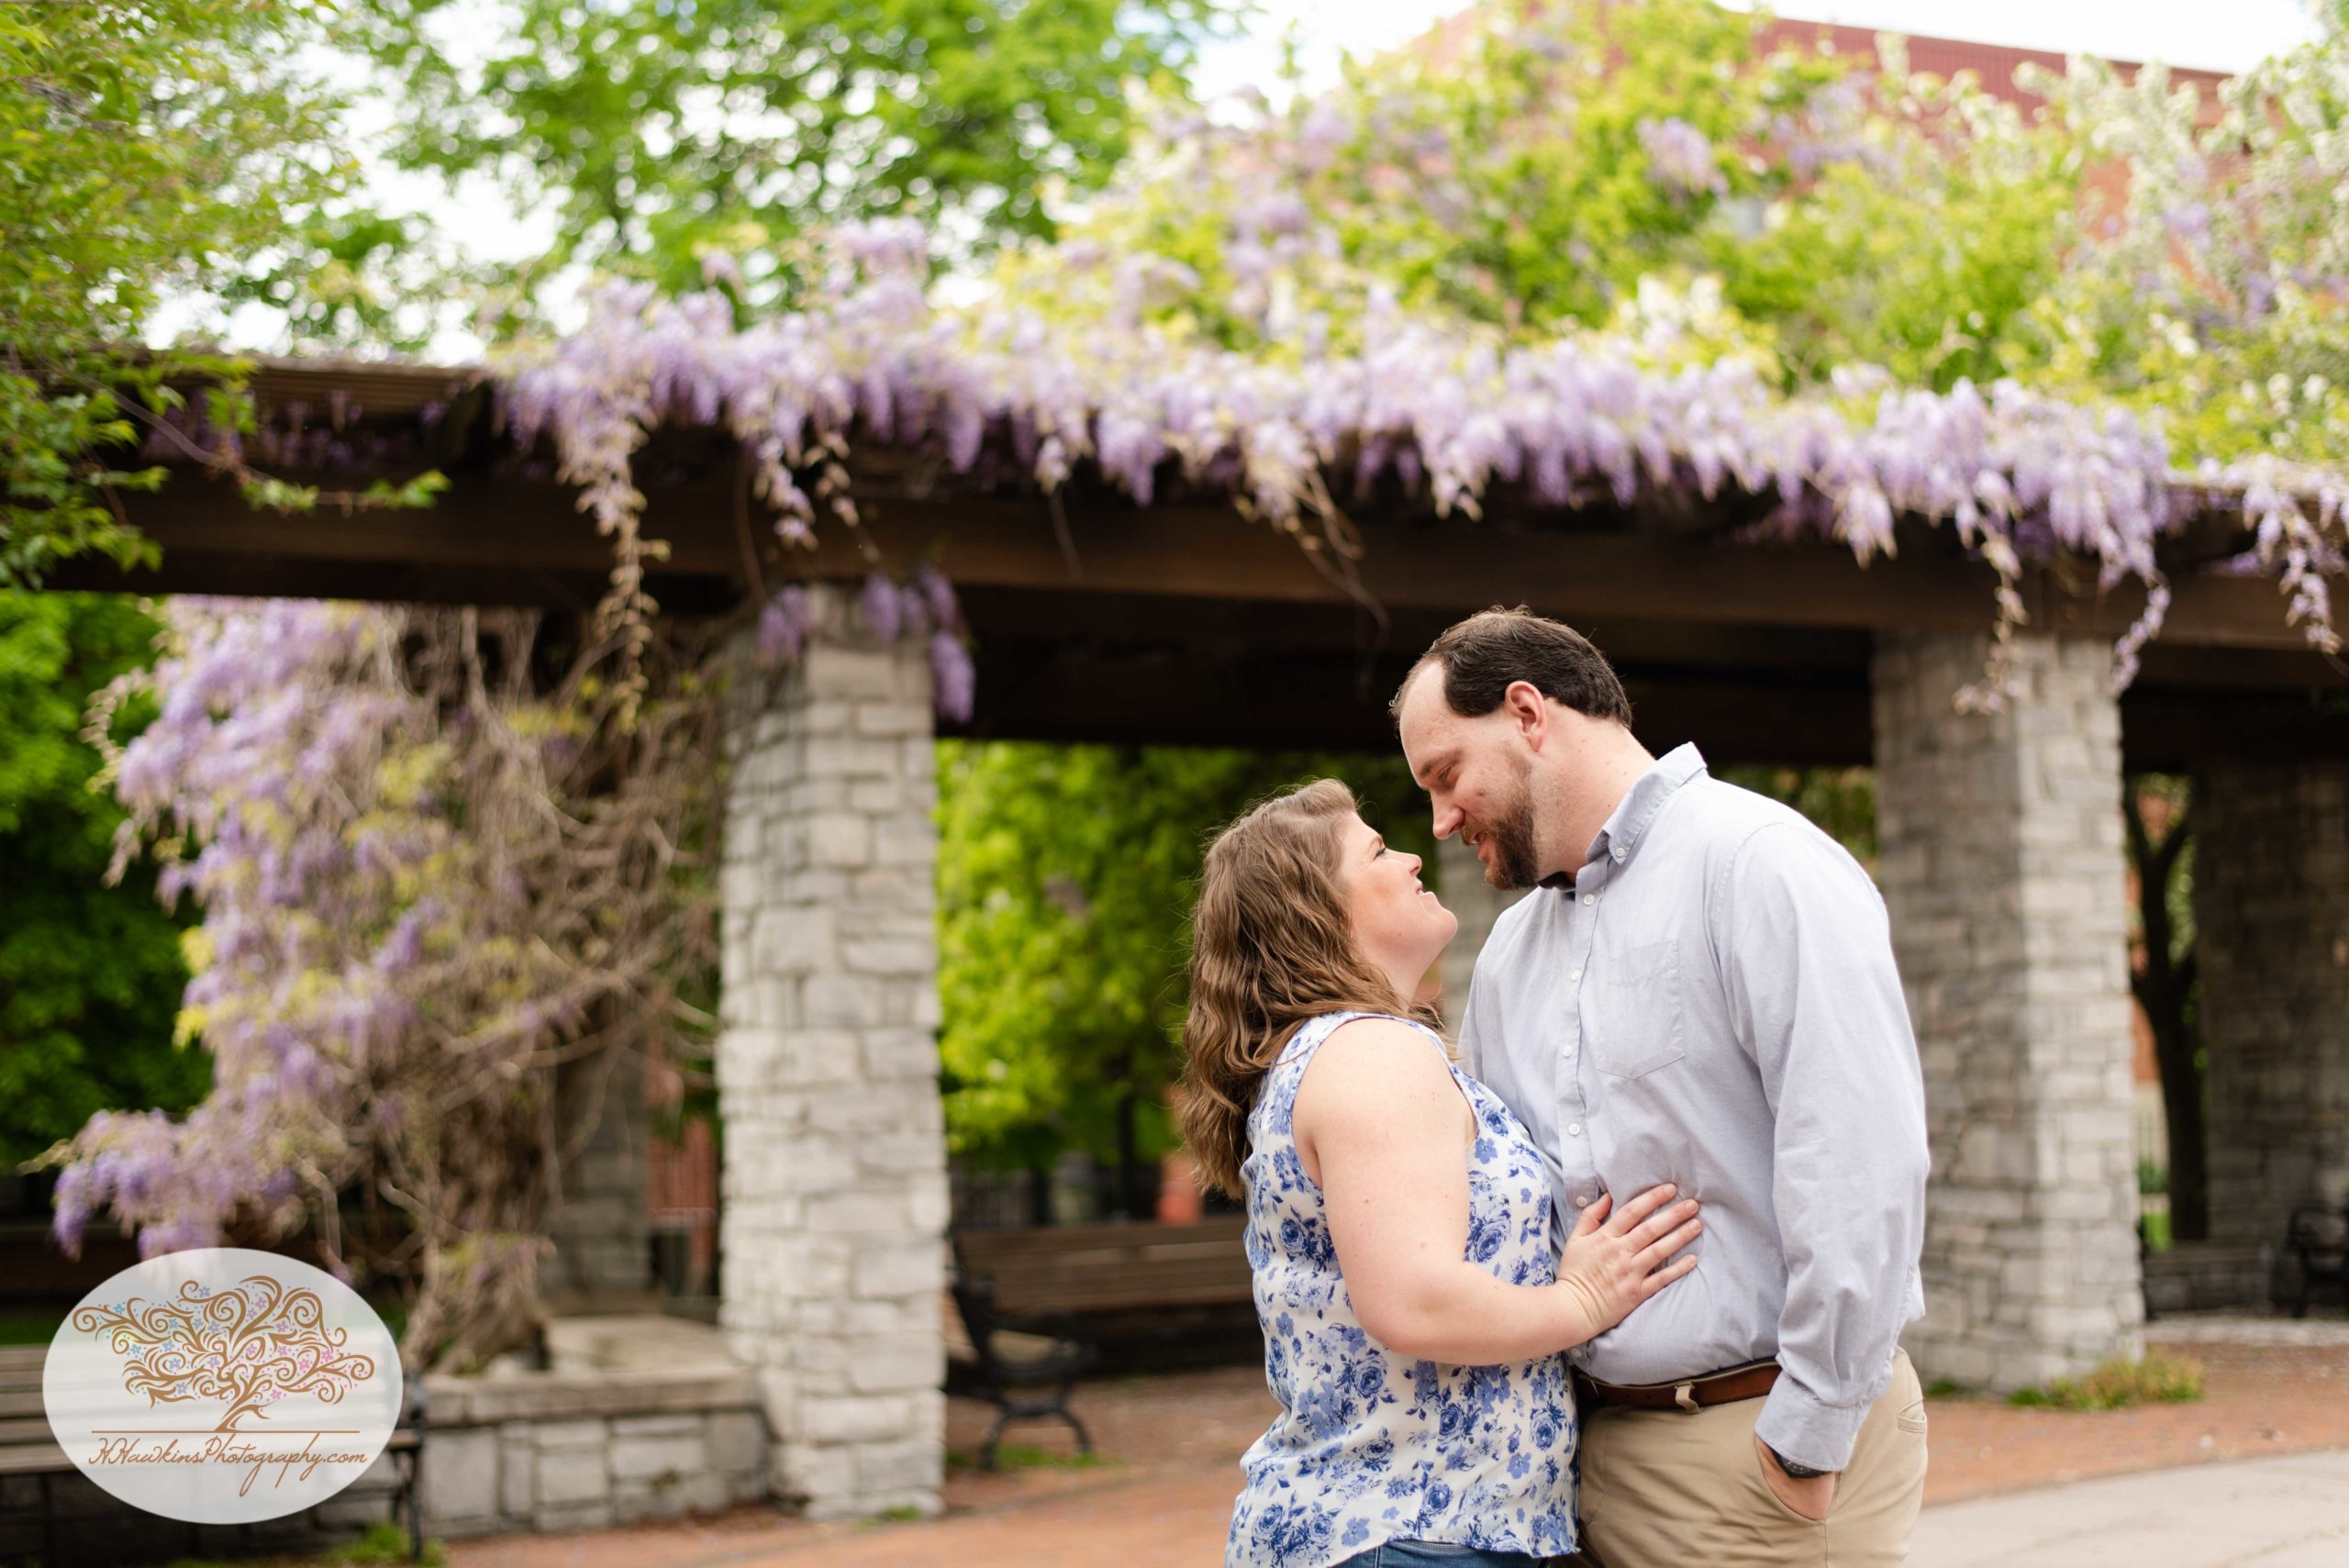 Bride and groom to be stand in front of purple flowers and a pergola at Syracuse's Franklin Square Park